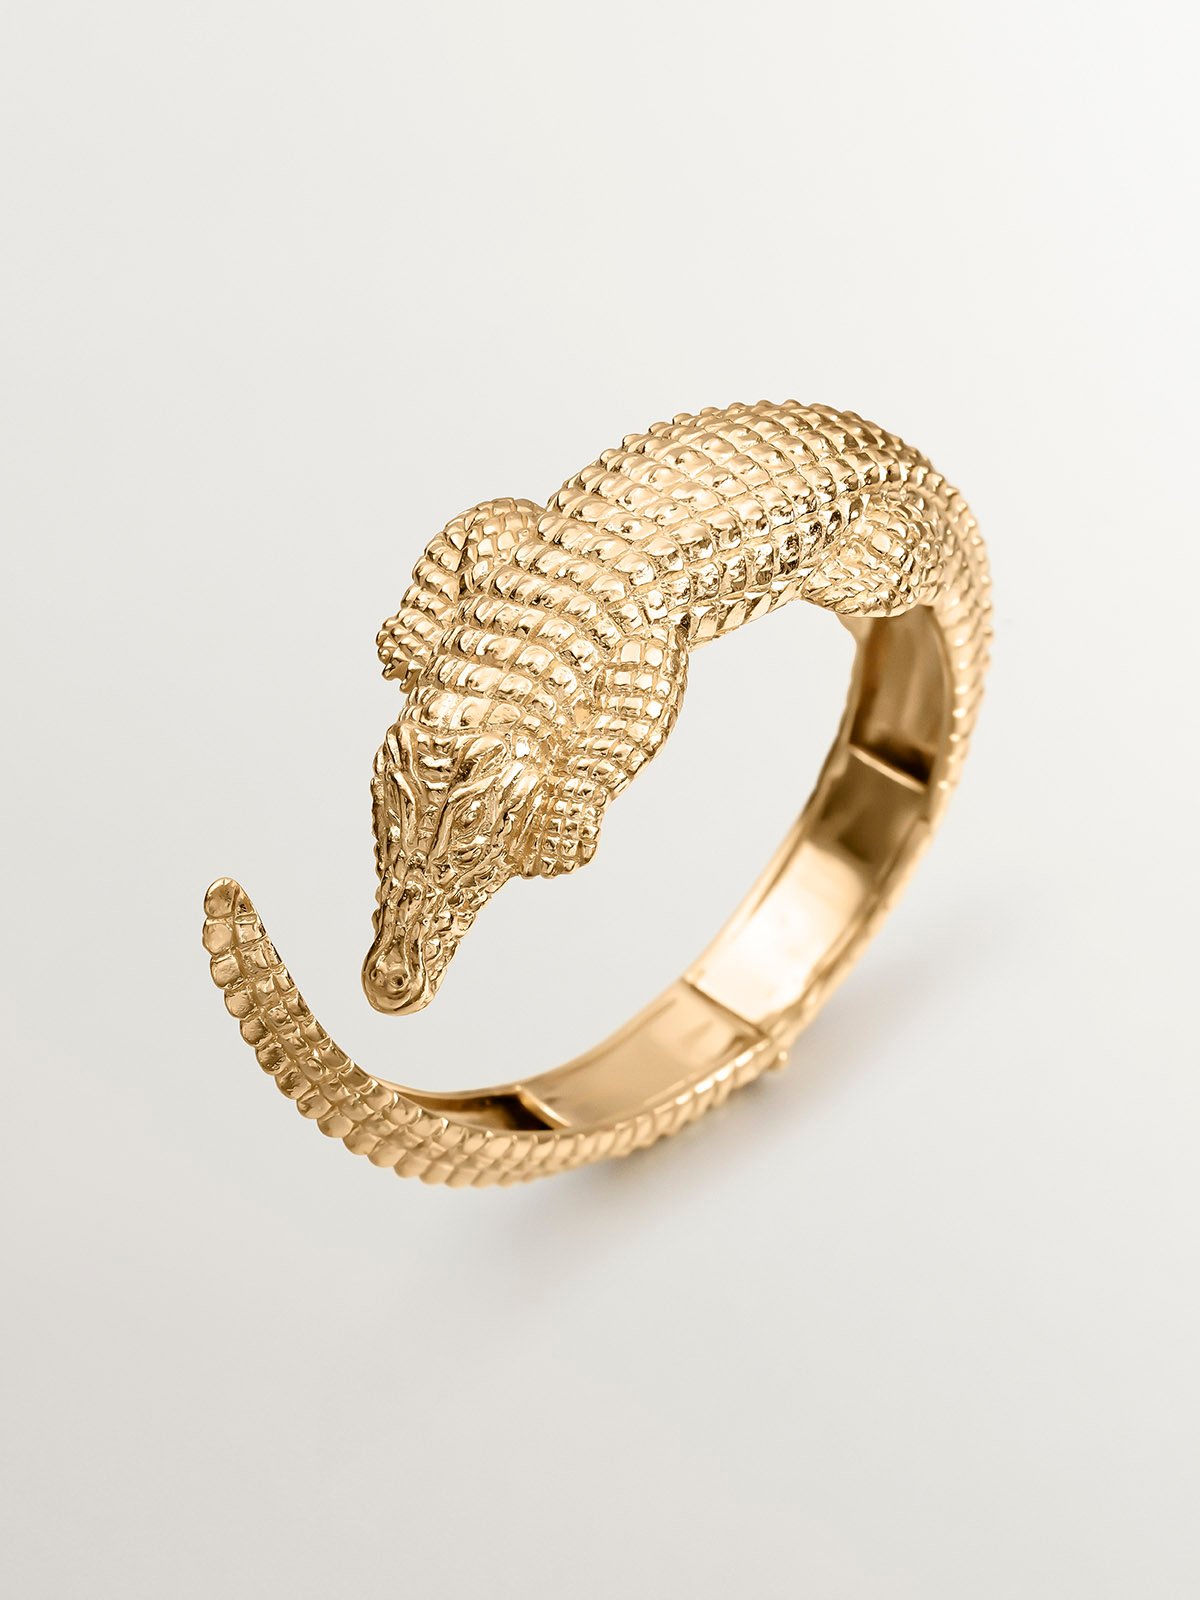 925 Silver bracelet bathed in 18K yellow gold with a crocodile shape.